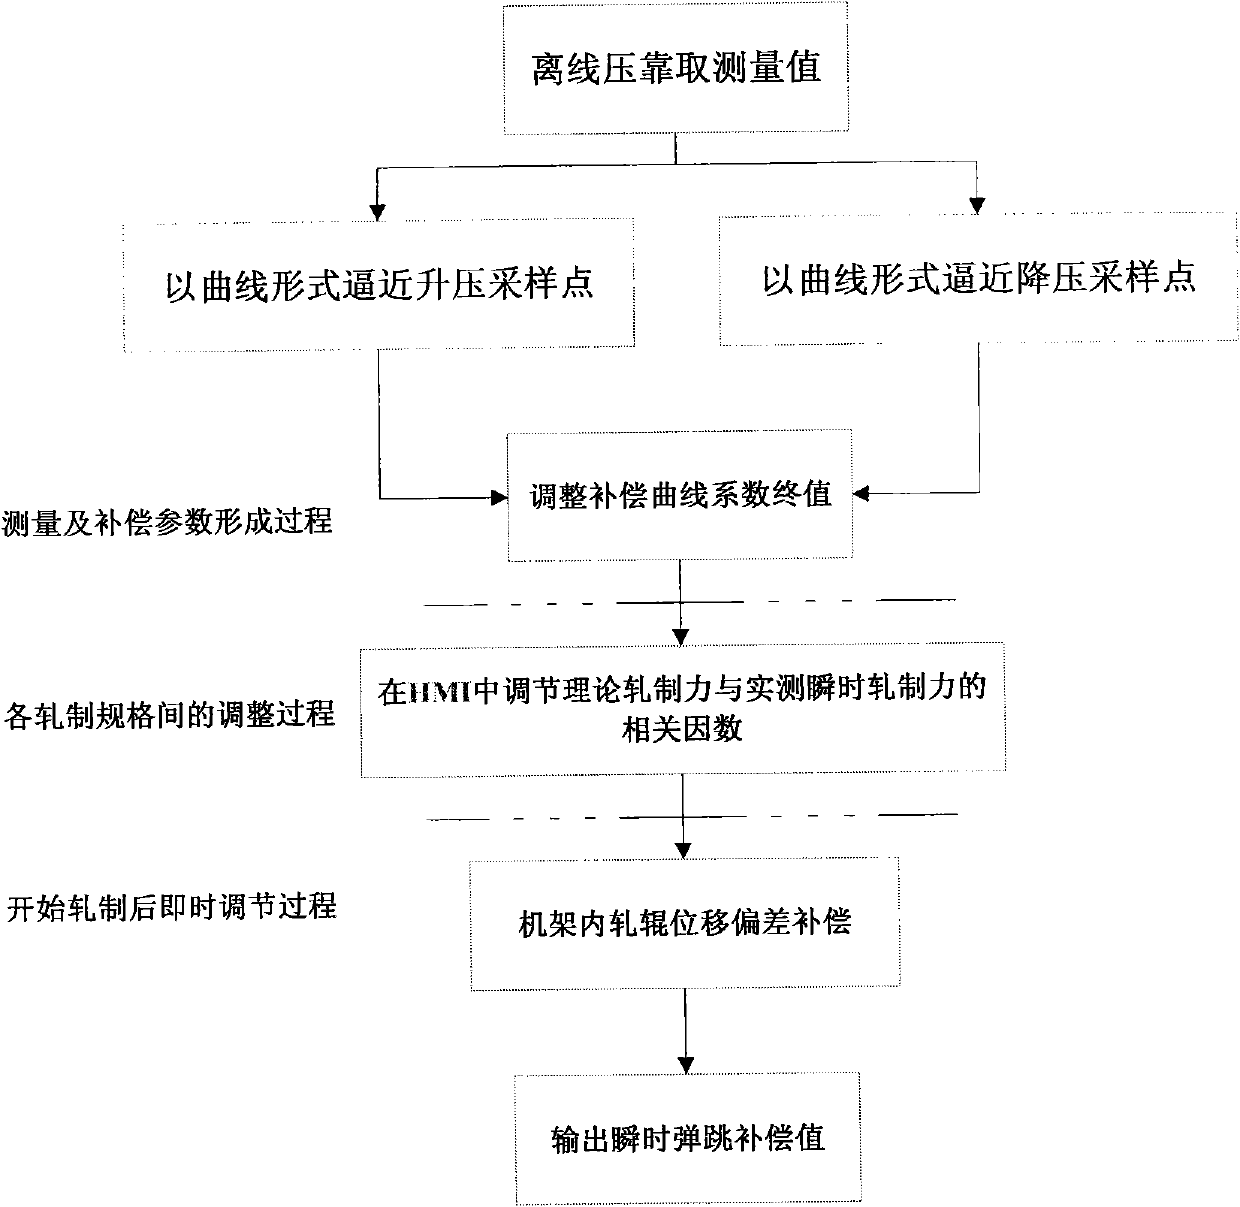 Compensation method of seamless steel pipe three-roll mill